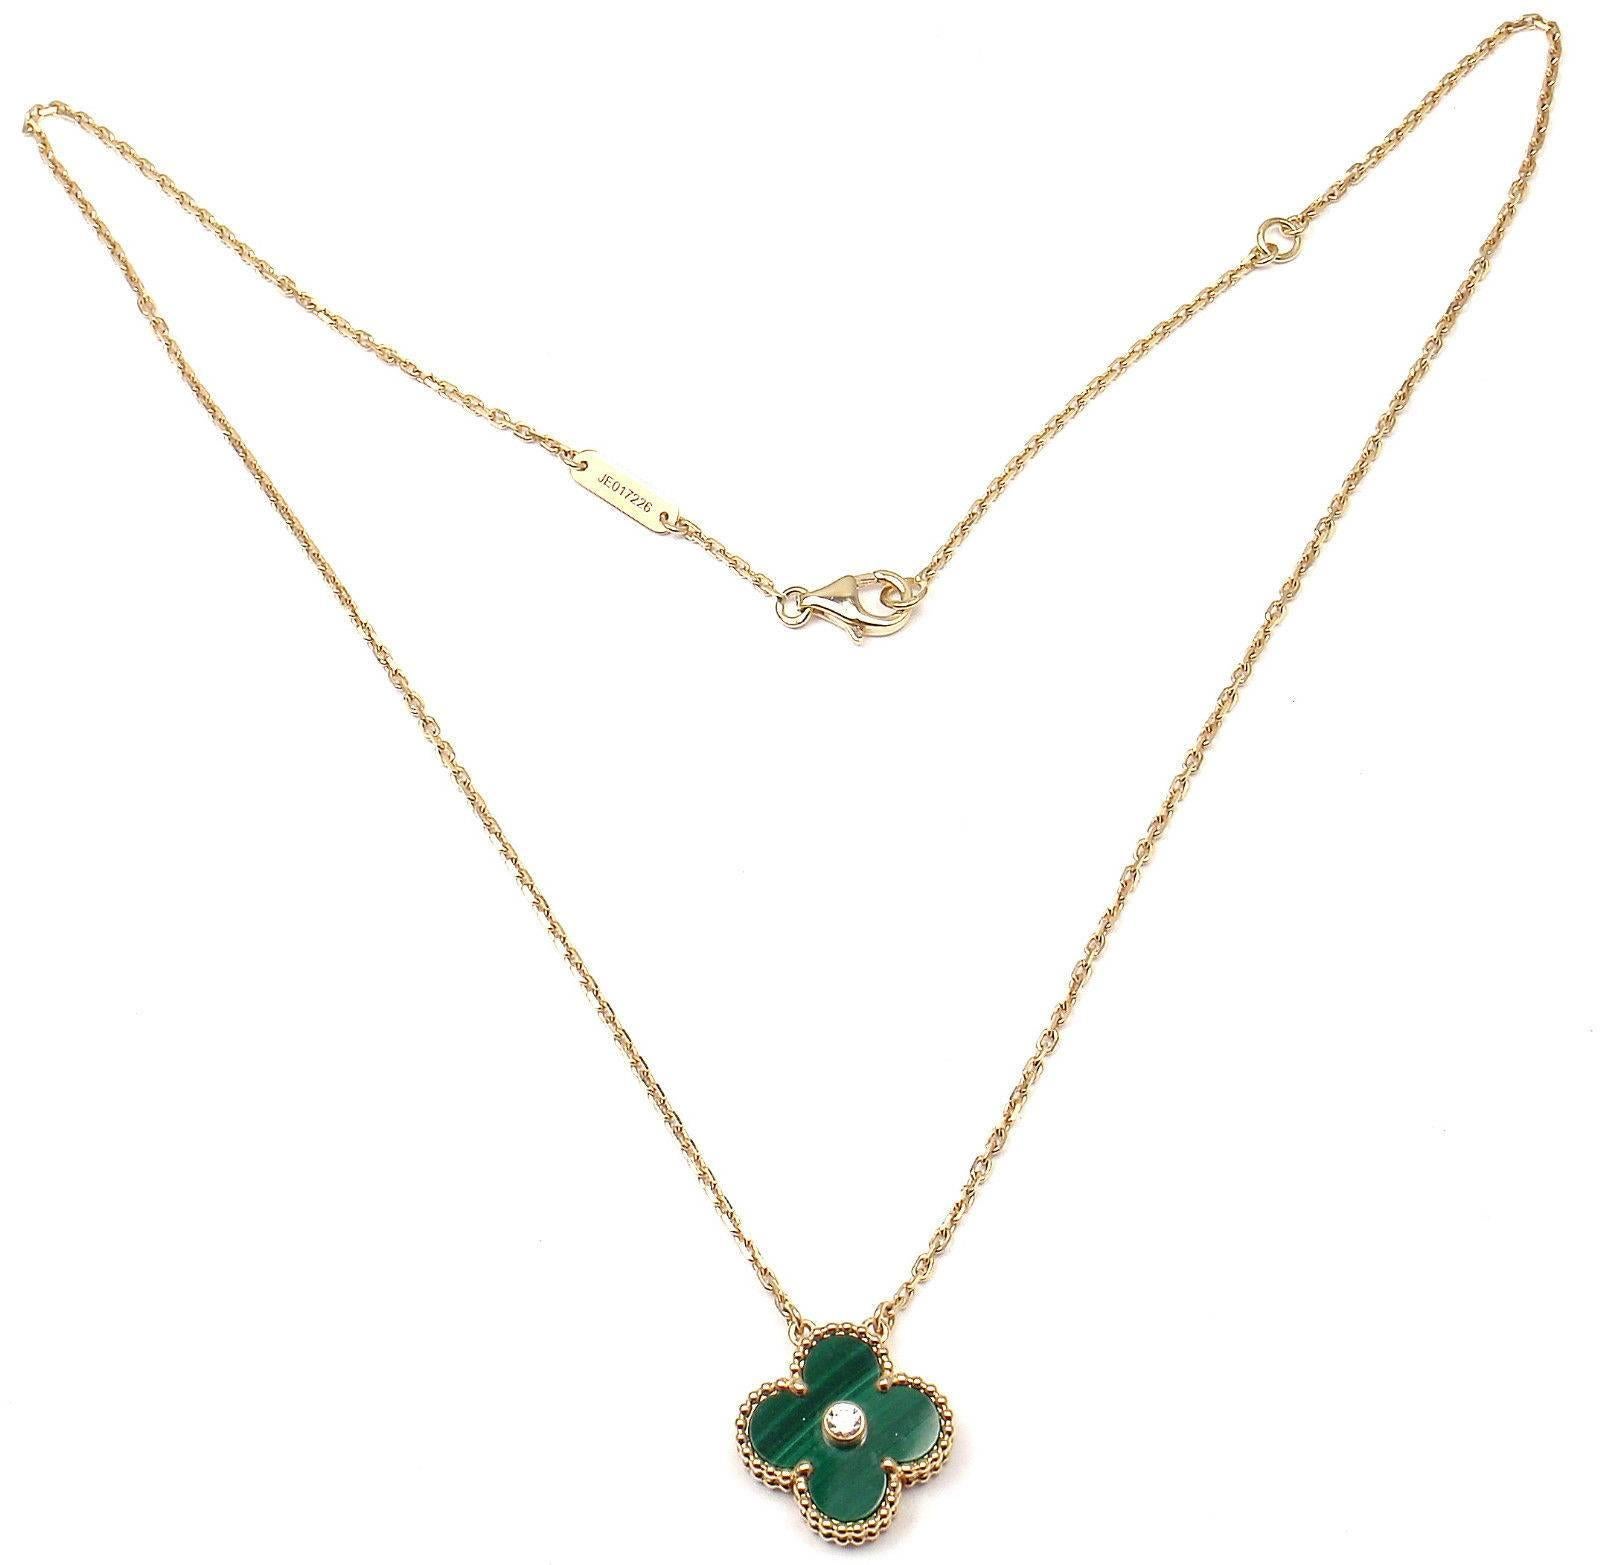 18k Yellow Gold Limited Edition Alhambra Diamond Malachite  Necklace
With 1 alhambra shape malachite  and a round brilliant cut diamond VVS1 clarity, D color total weight approx. .05ct
This necklace was created in limited by Van Cleef & Arpels to